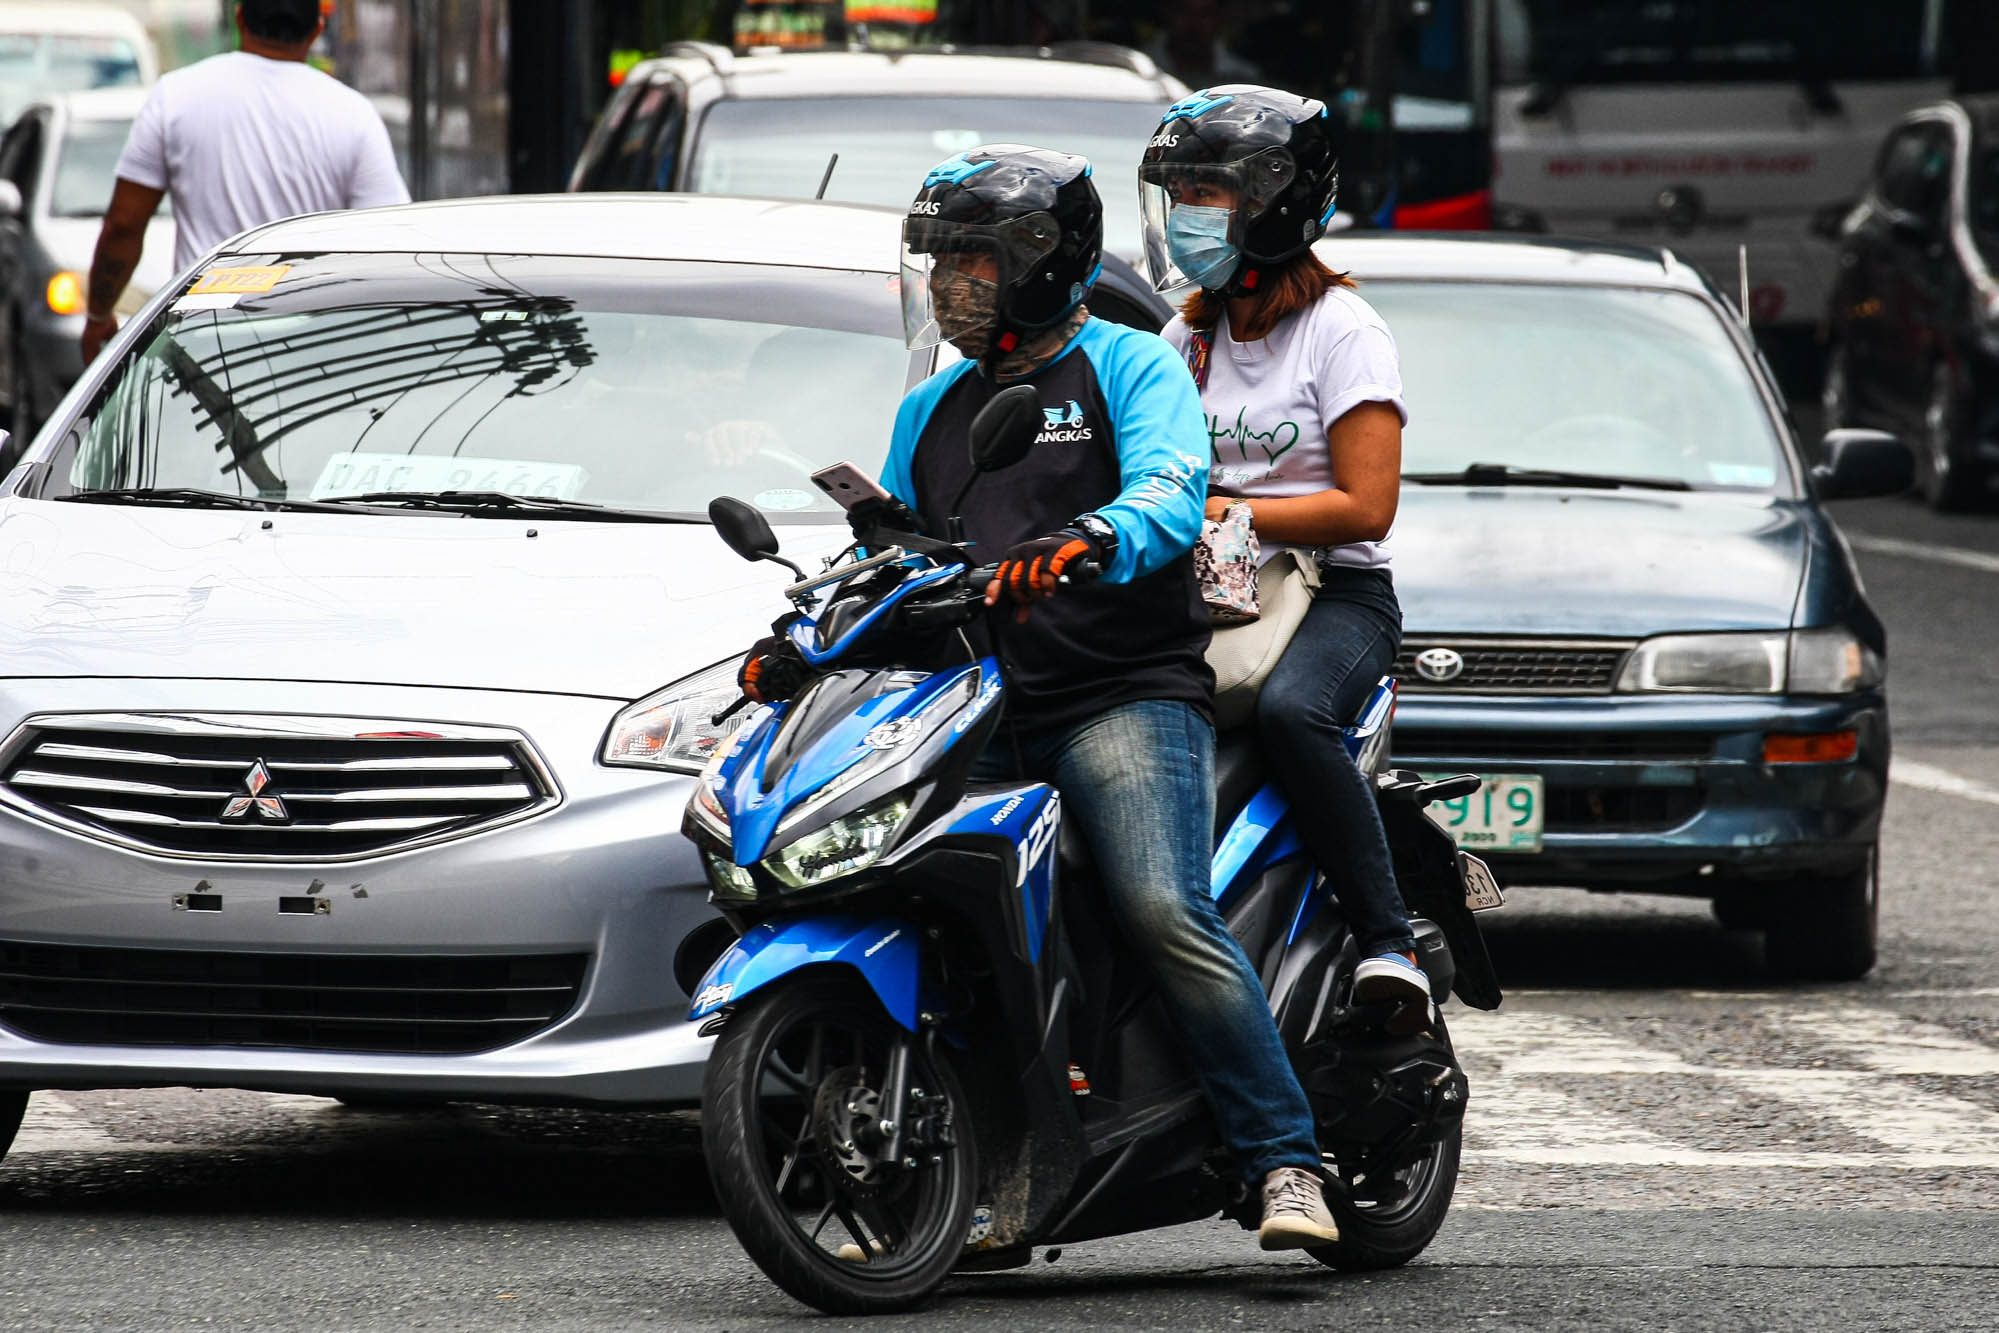 After 4 years, more motorcycle taxi players may be coming